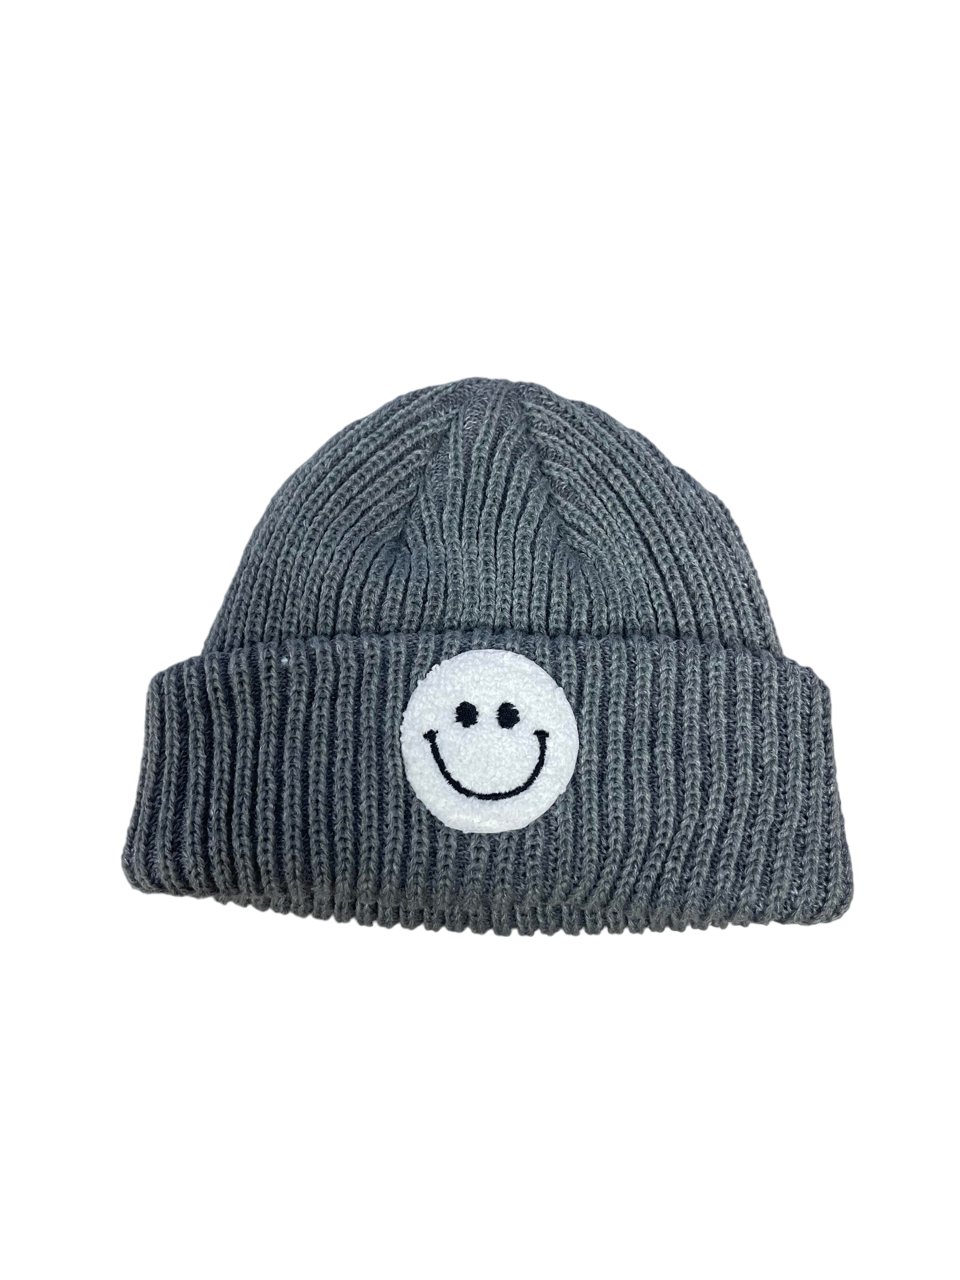 Grey Hat With White Smile